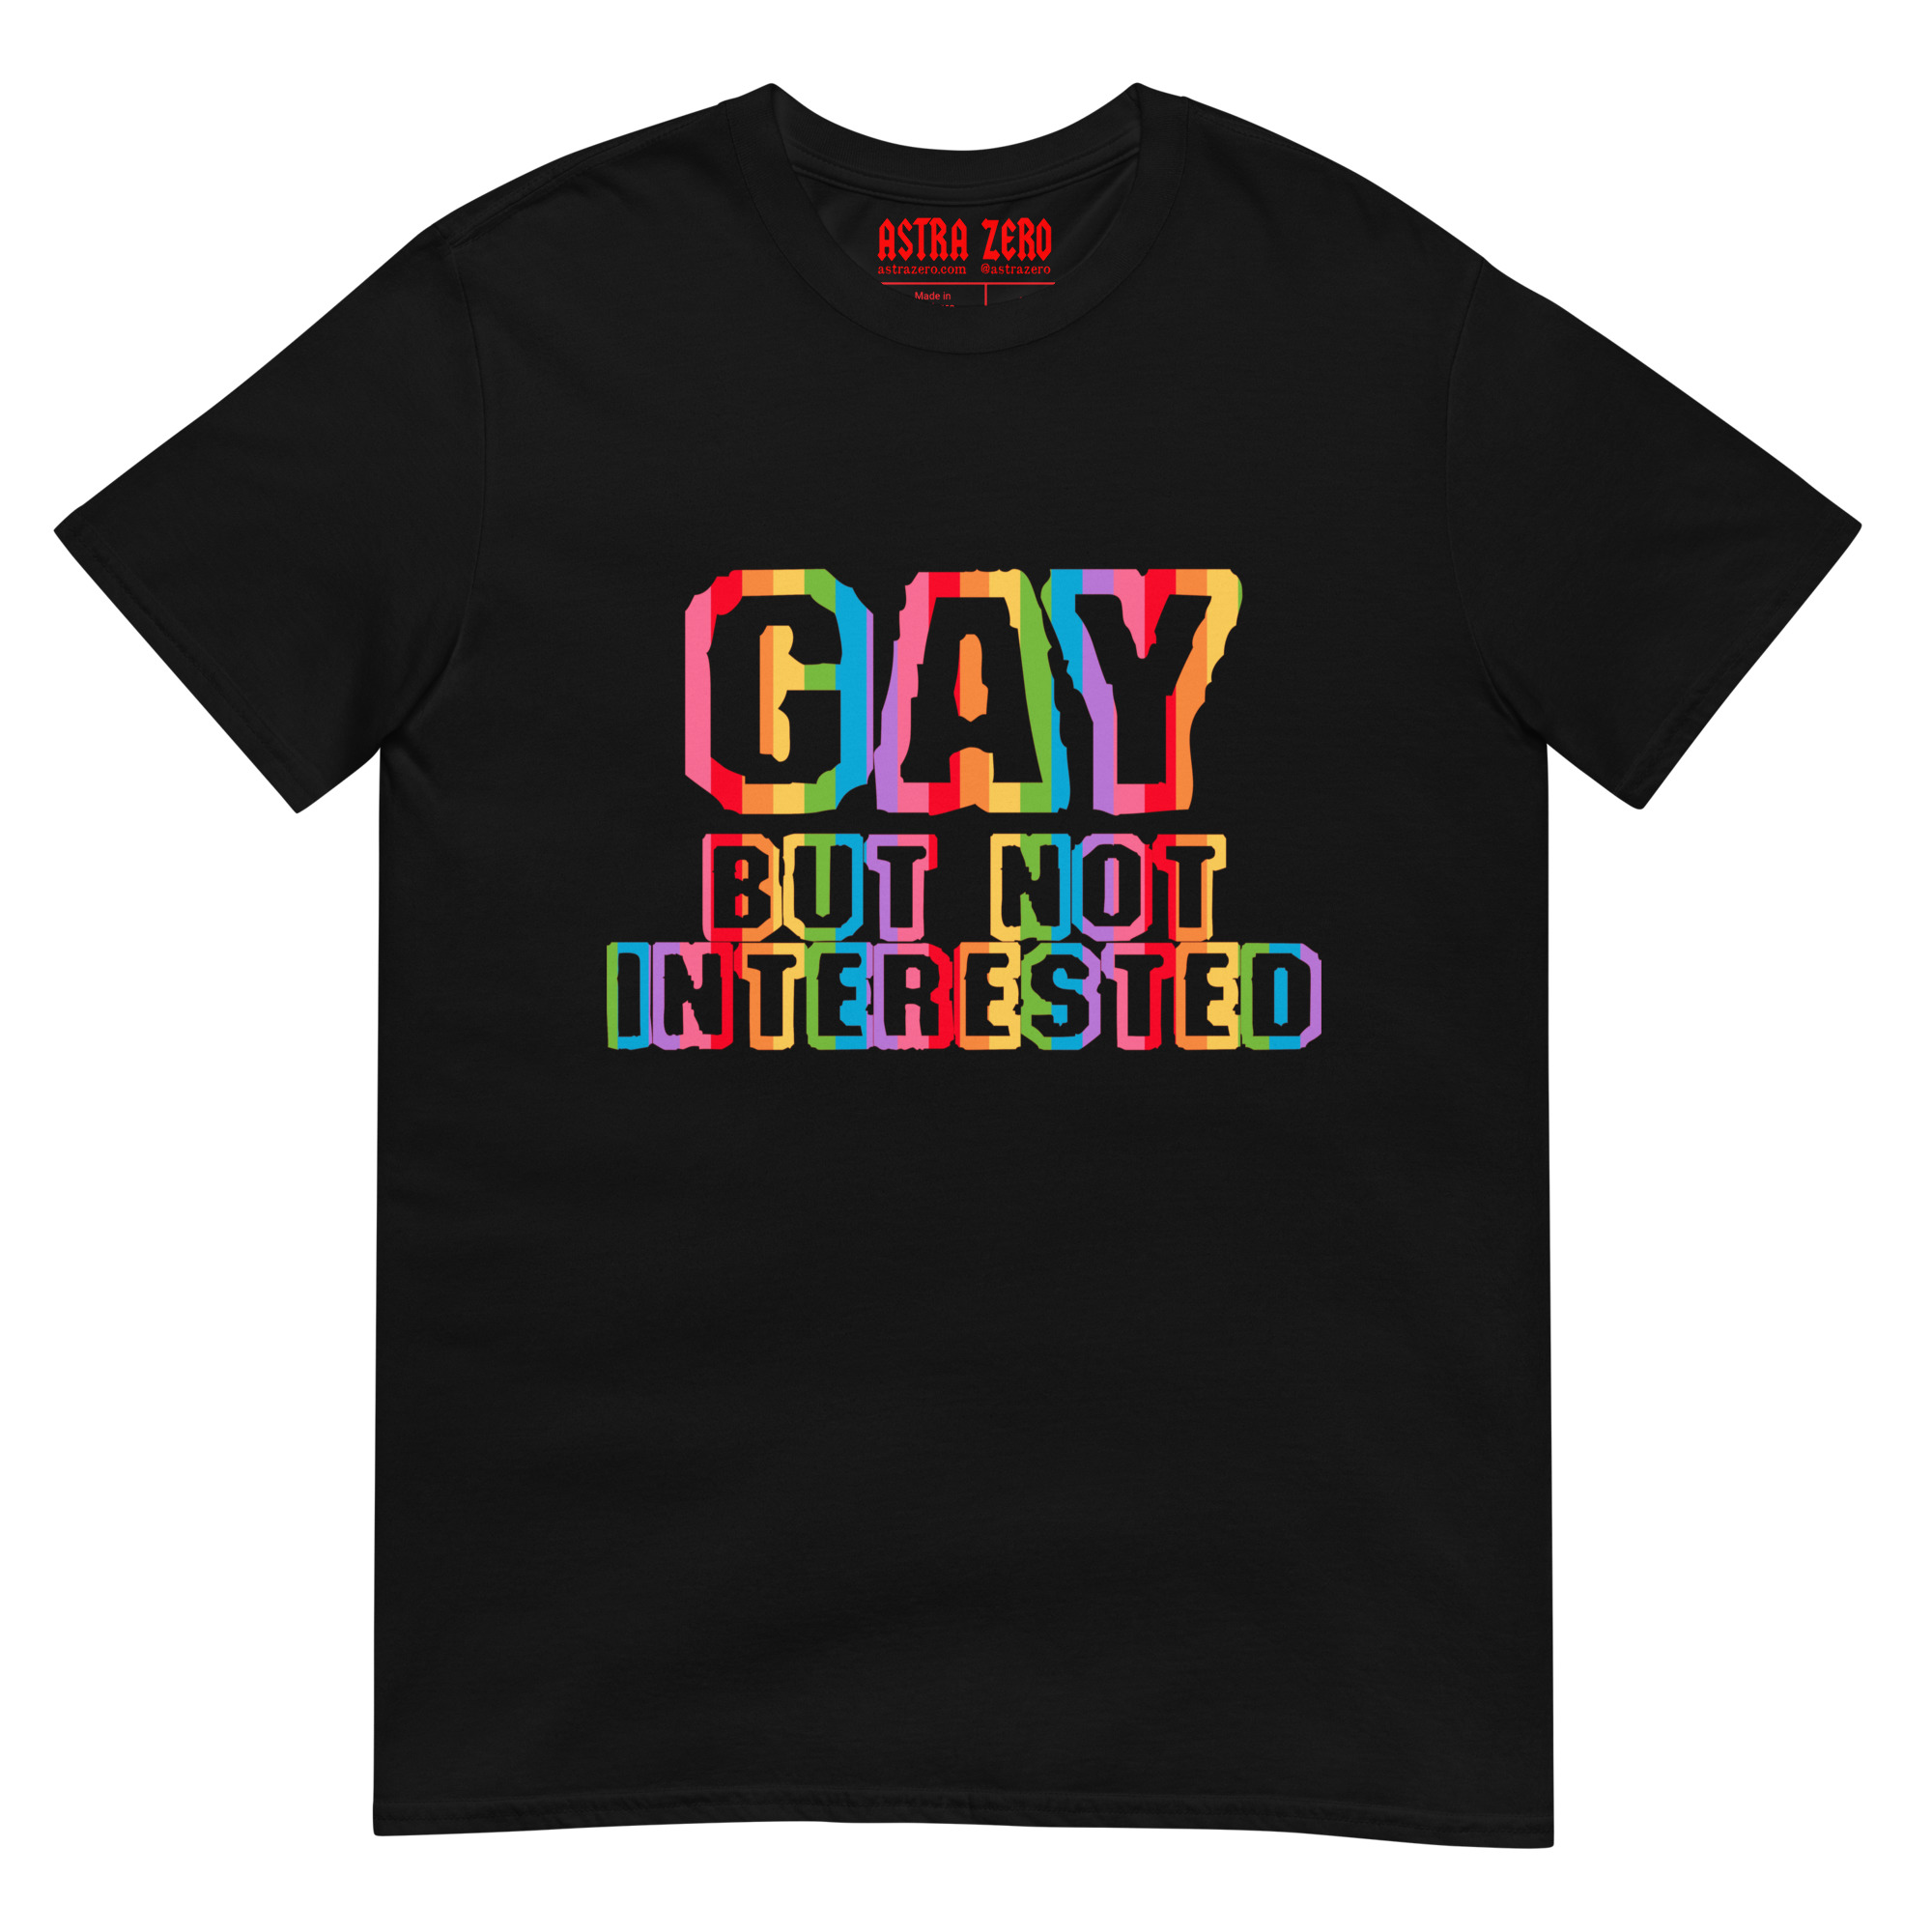 Featured image for “Gay but not interested - Short-Sleeve Unisex T-Shirt”